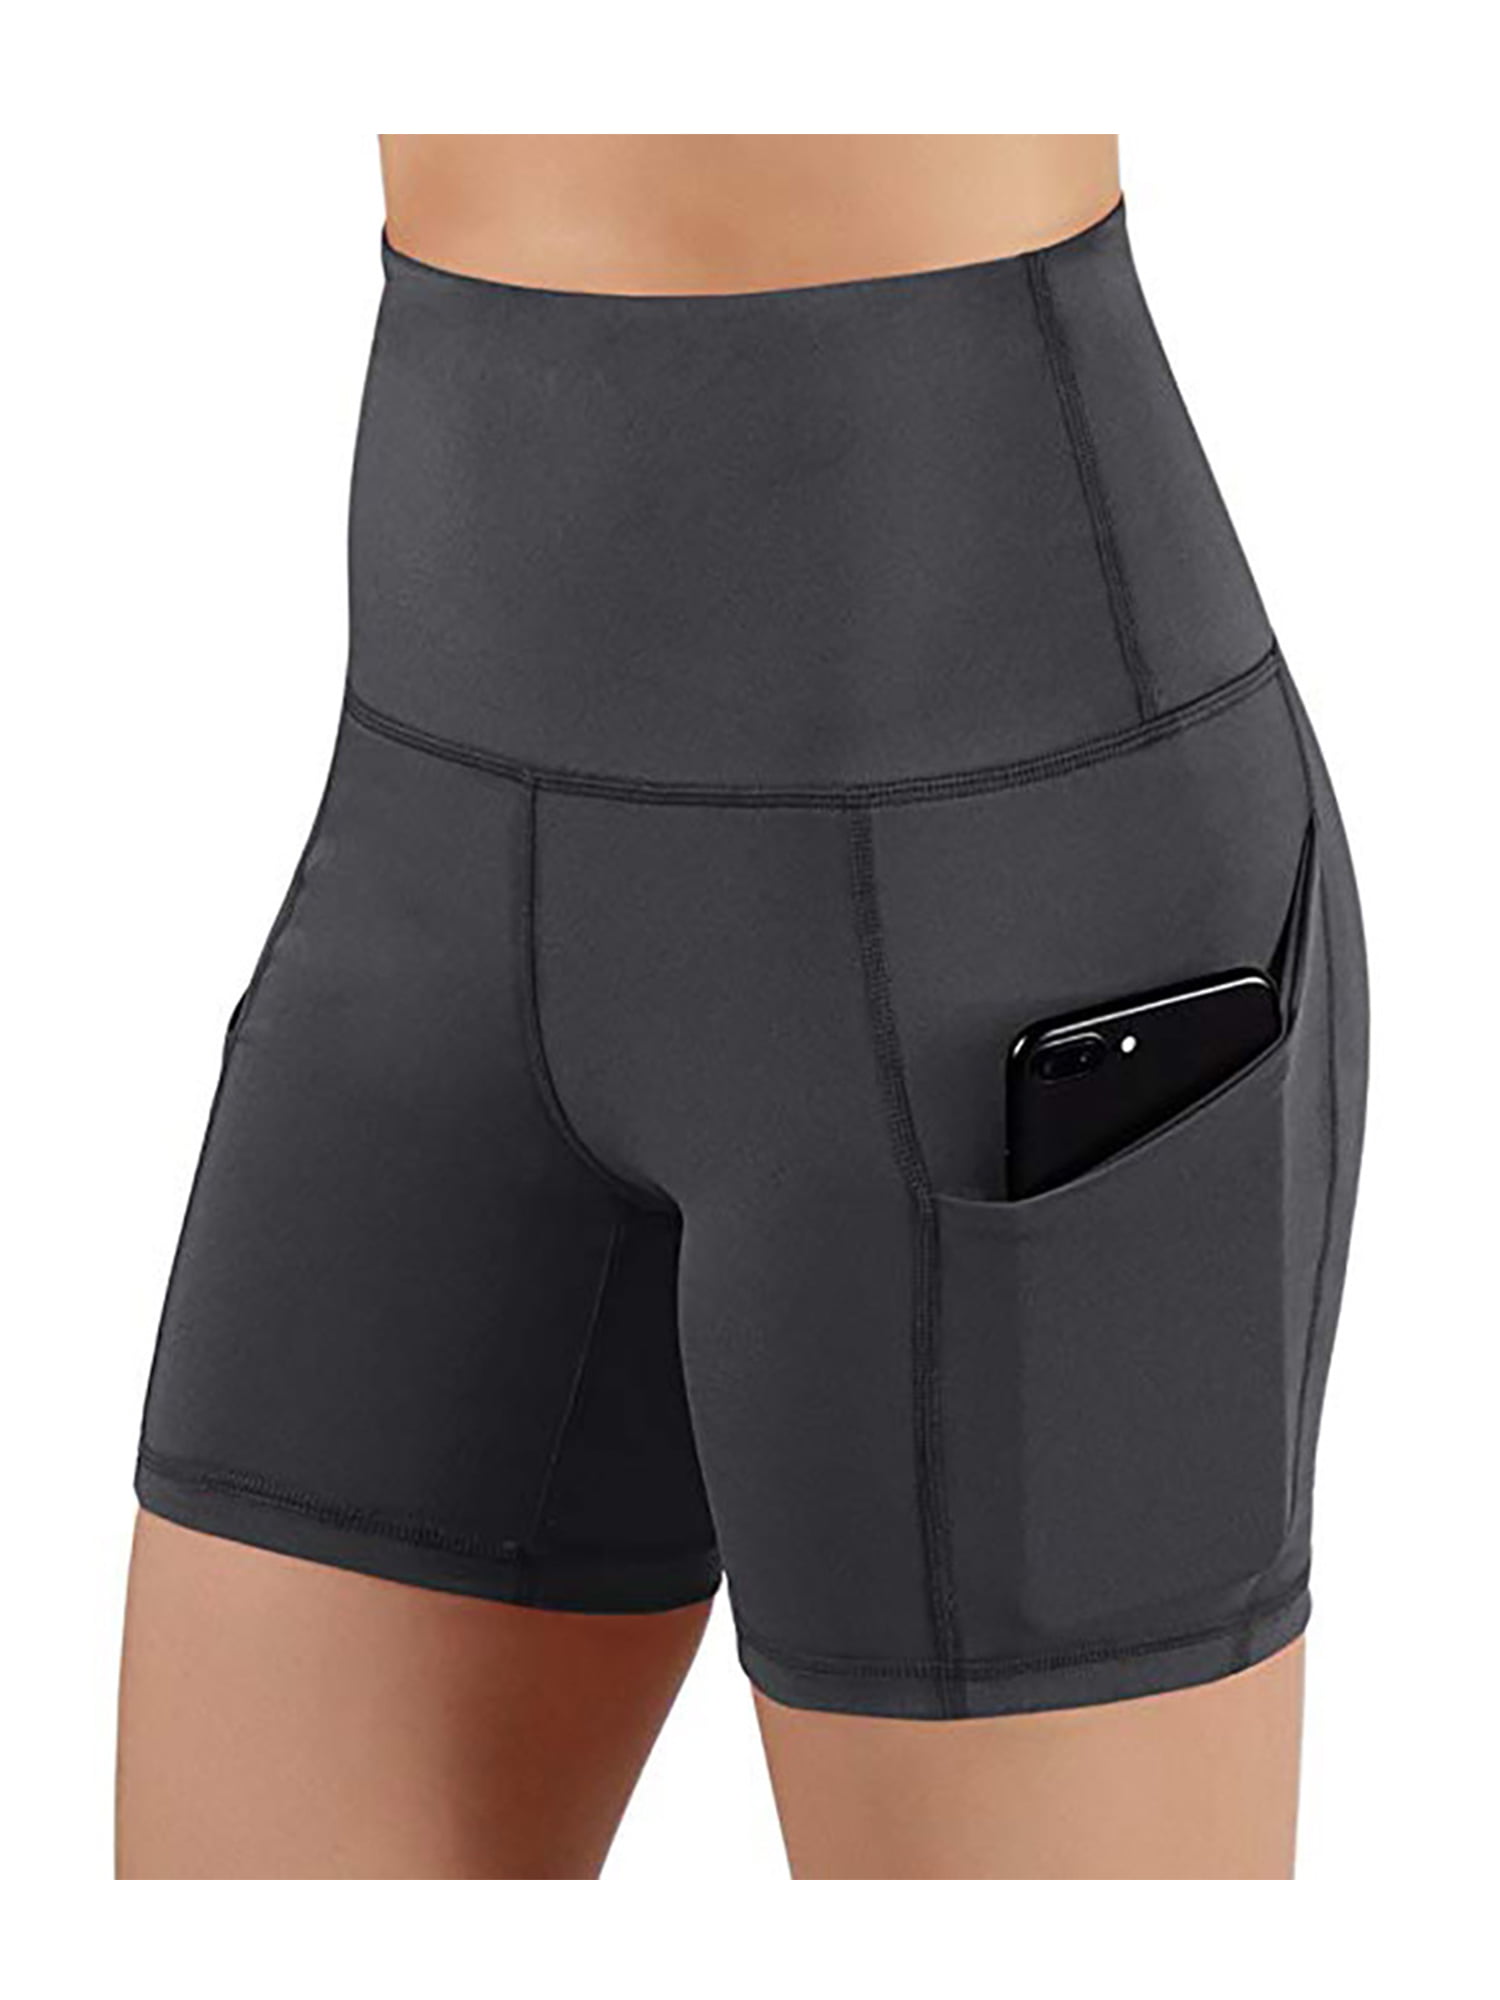 Puimentiua Yoga Shorts Seamless Sport Short Pants for Women High Waist Tummy Control with Side Pockets and Hidden Pockets 4-Stretchy Yoga Leggings.